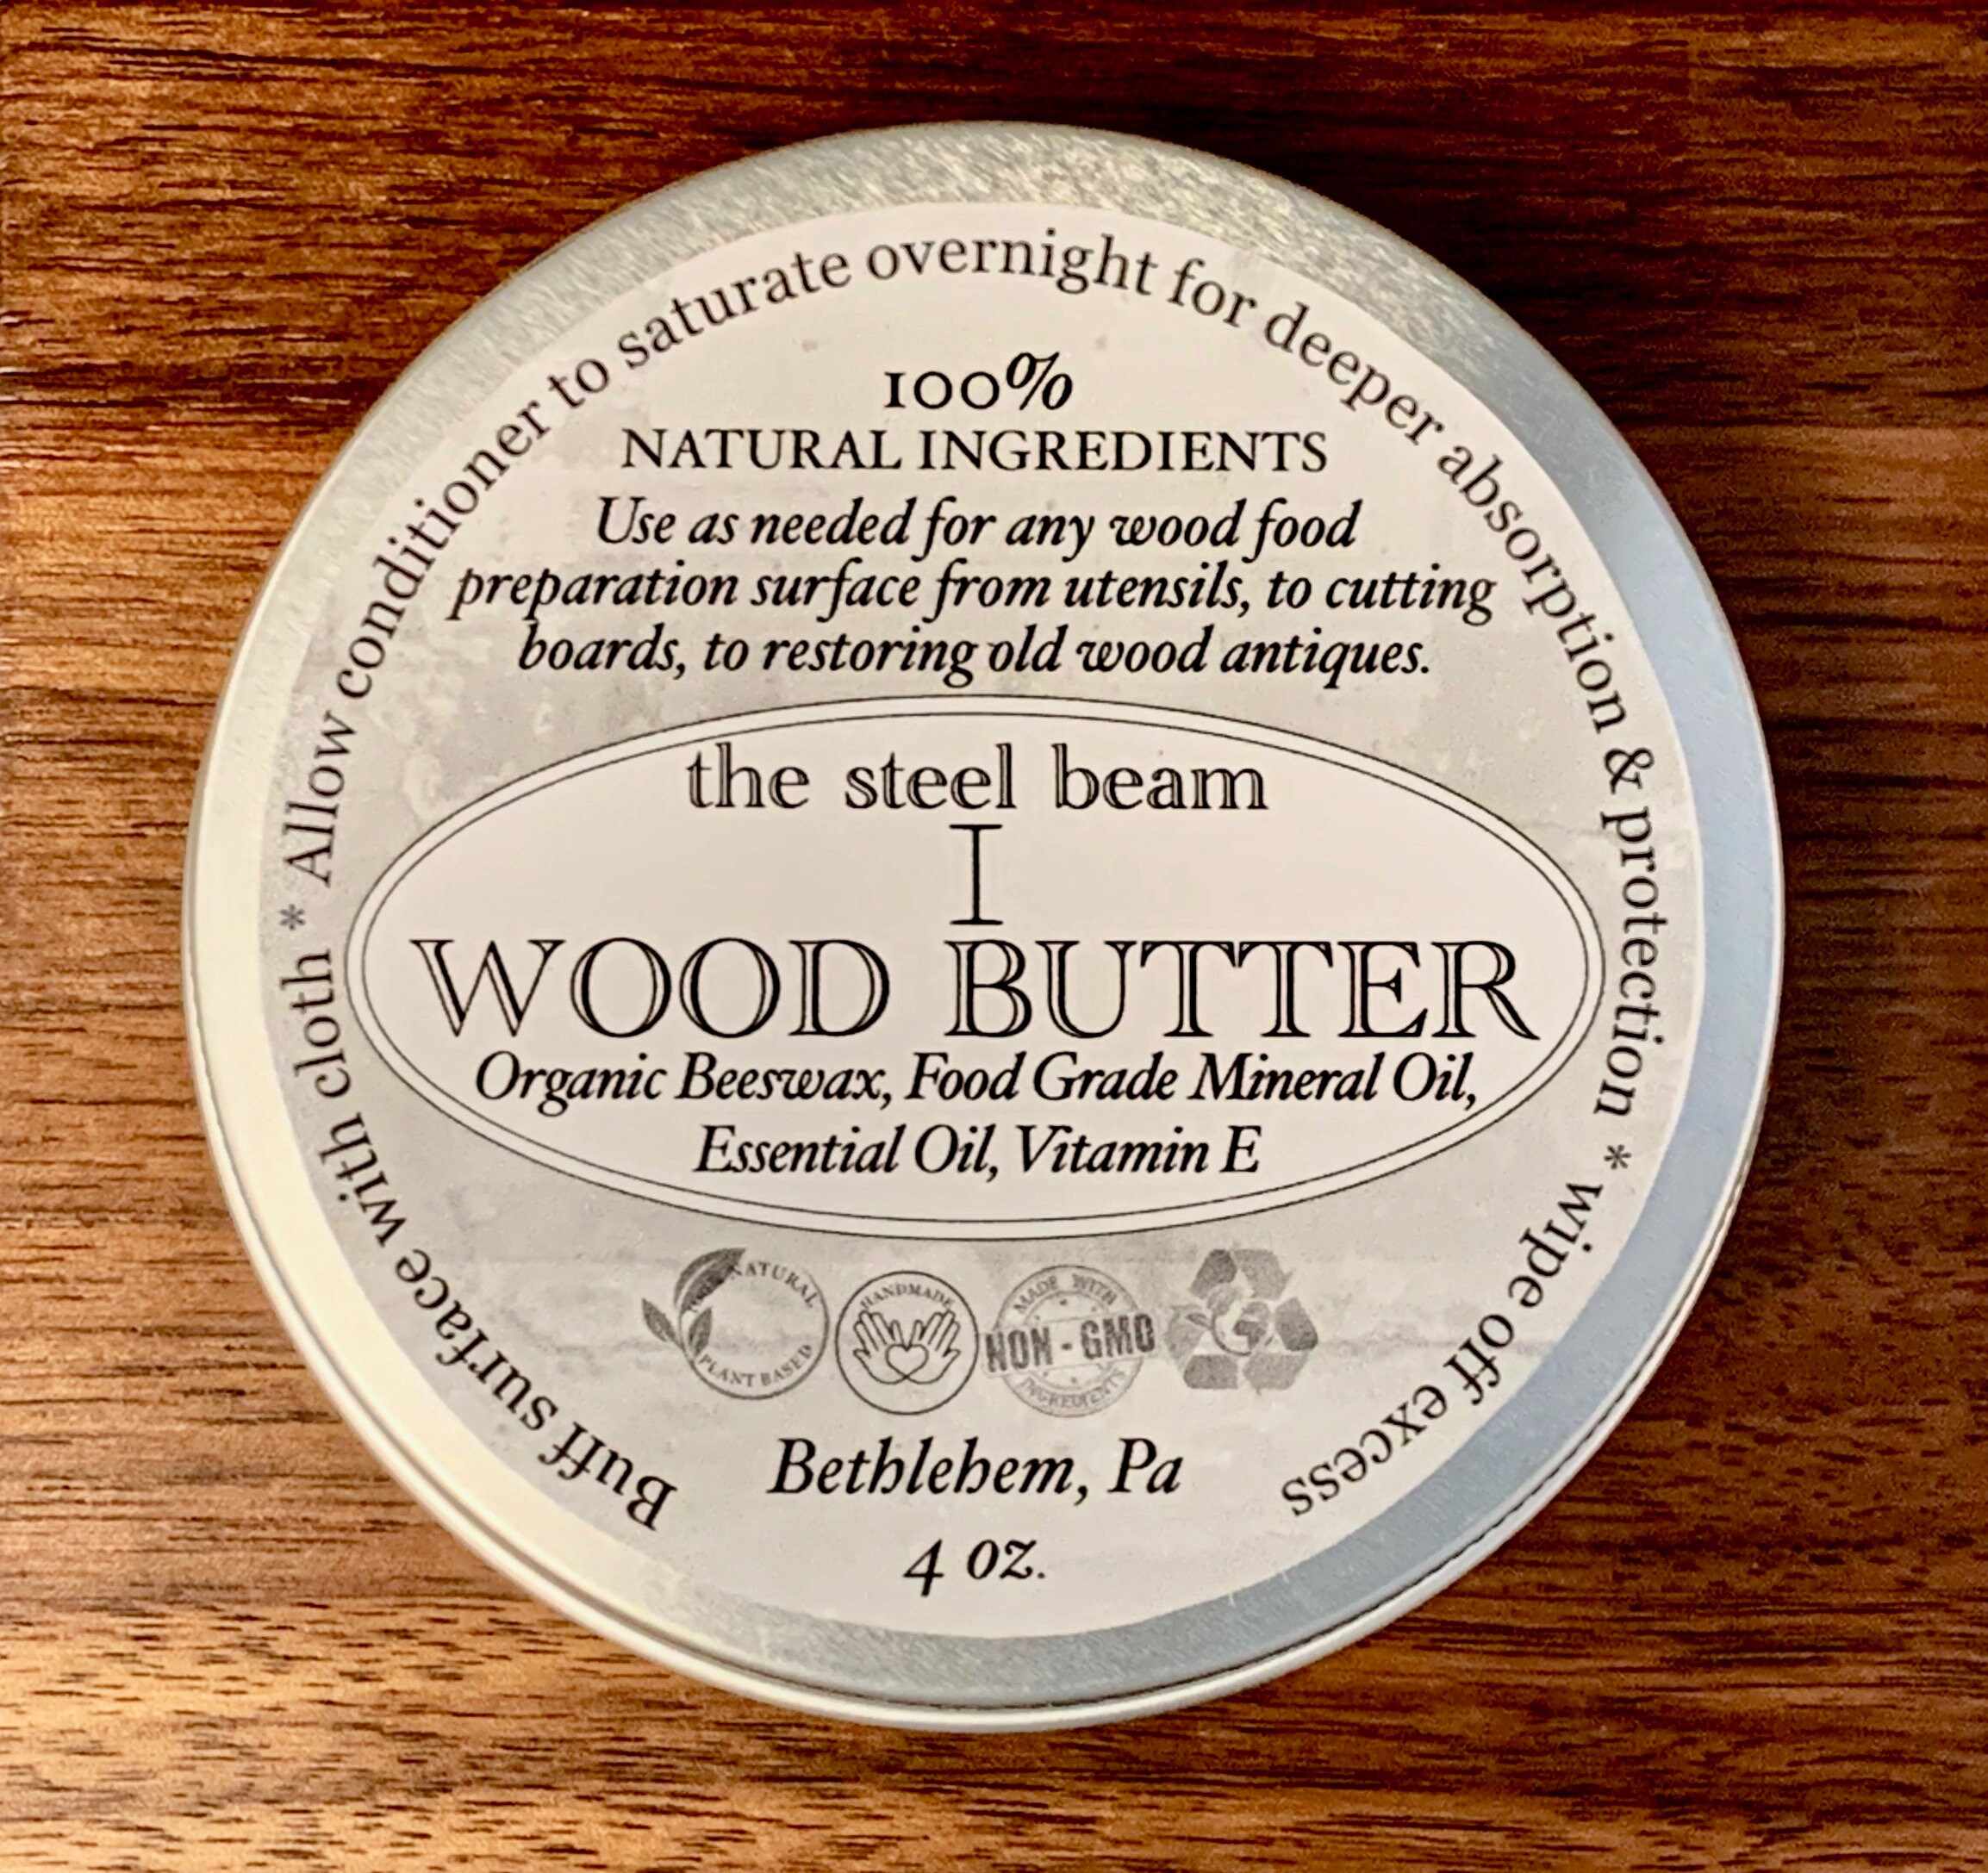 Natural Wood Wax and Conditioner – Woodcock Design